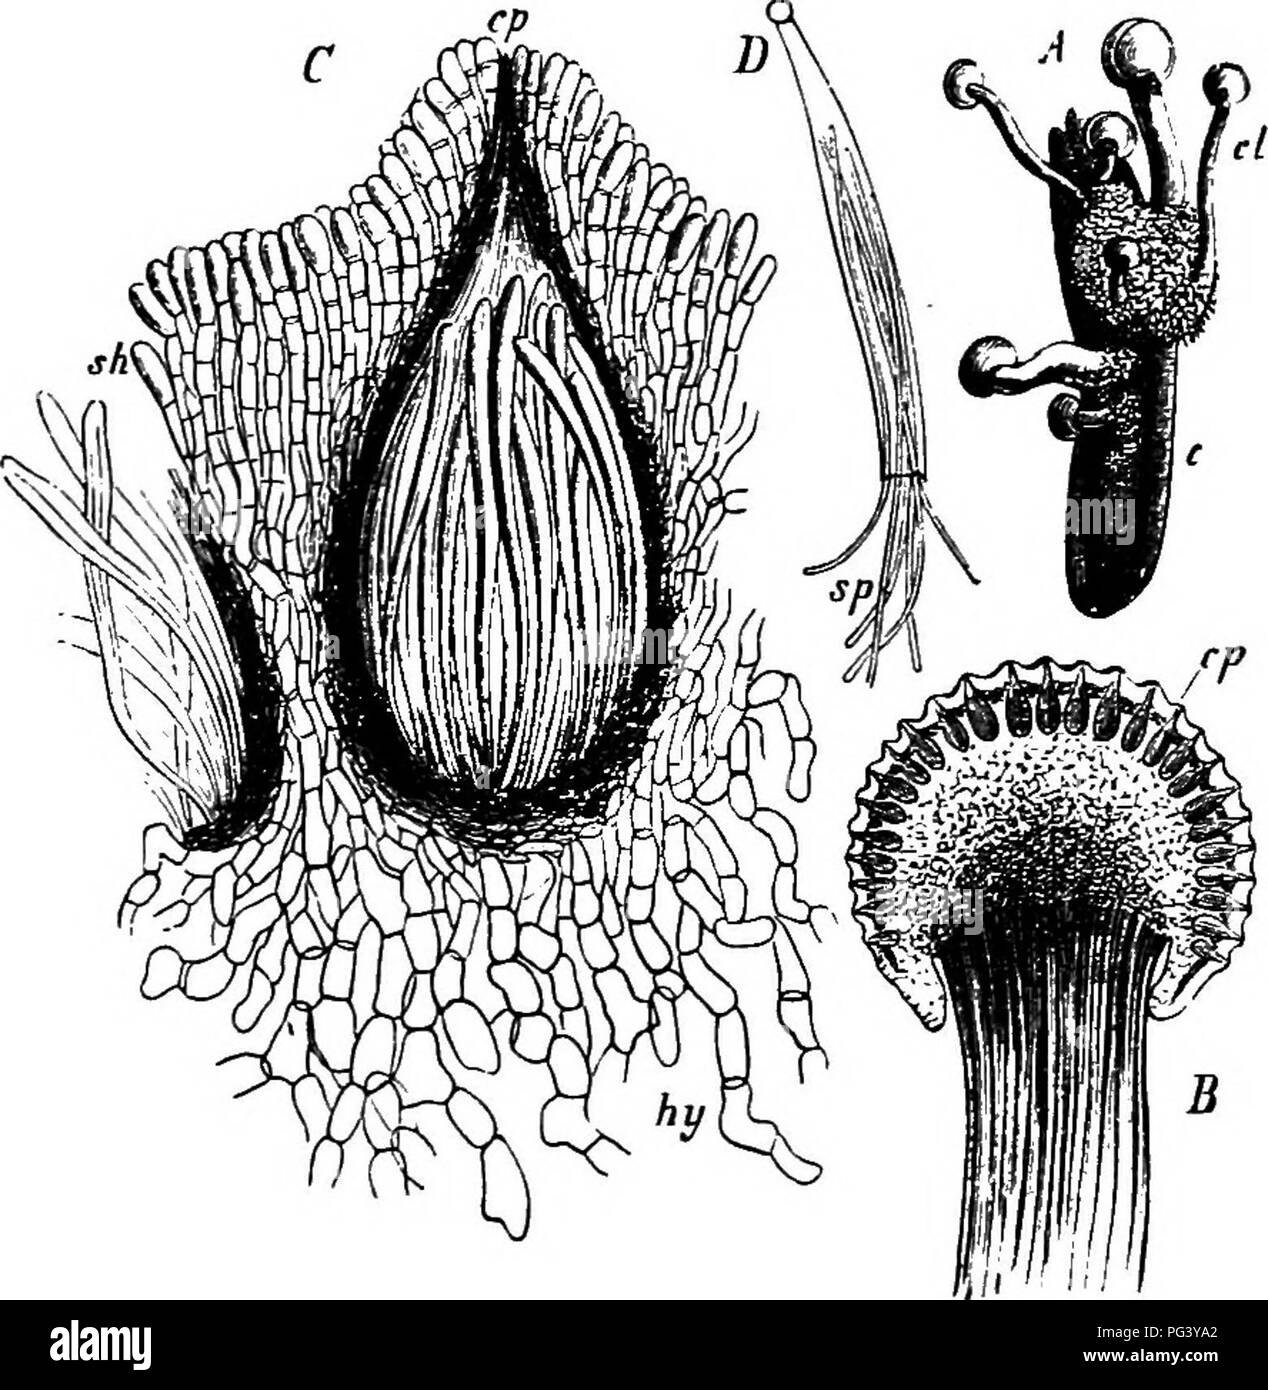 . Comparative morphology and biology of the fungi, mycetozoa and bacteria . Plant morphology; Fungi; Myxomycetes; Bacteriology. CHAPTER V.—COMPARATIVE REVIEIV.—ASCOMVCETES. 227 formed closely woven thallus-structures (see page 43), which cause roundish red spots about I cm. in diameter in the still living green leaf; spermogonia and archicarps- make their appearance in the spots in the course of the summer. The Fungus does not go beyond the complete development and subsequent fertilisation of the archicarps during the summer, but falls to the ground in autumn with the leaf, and there the furth Stock Photo